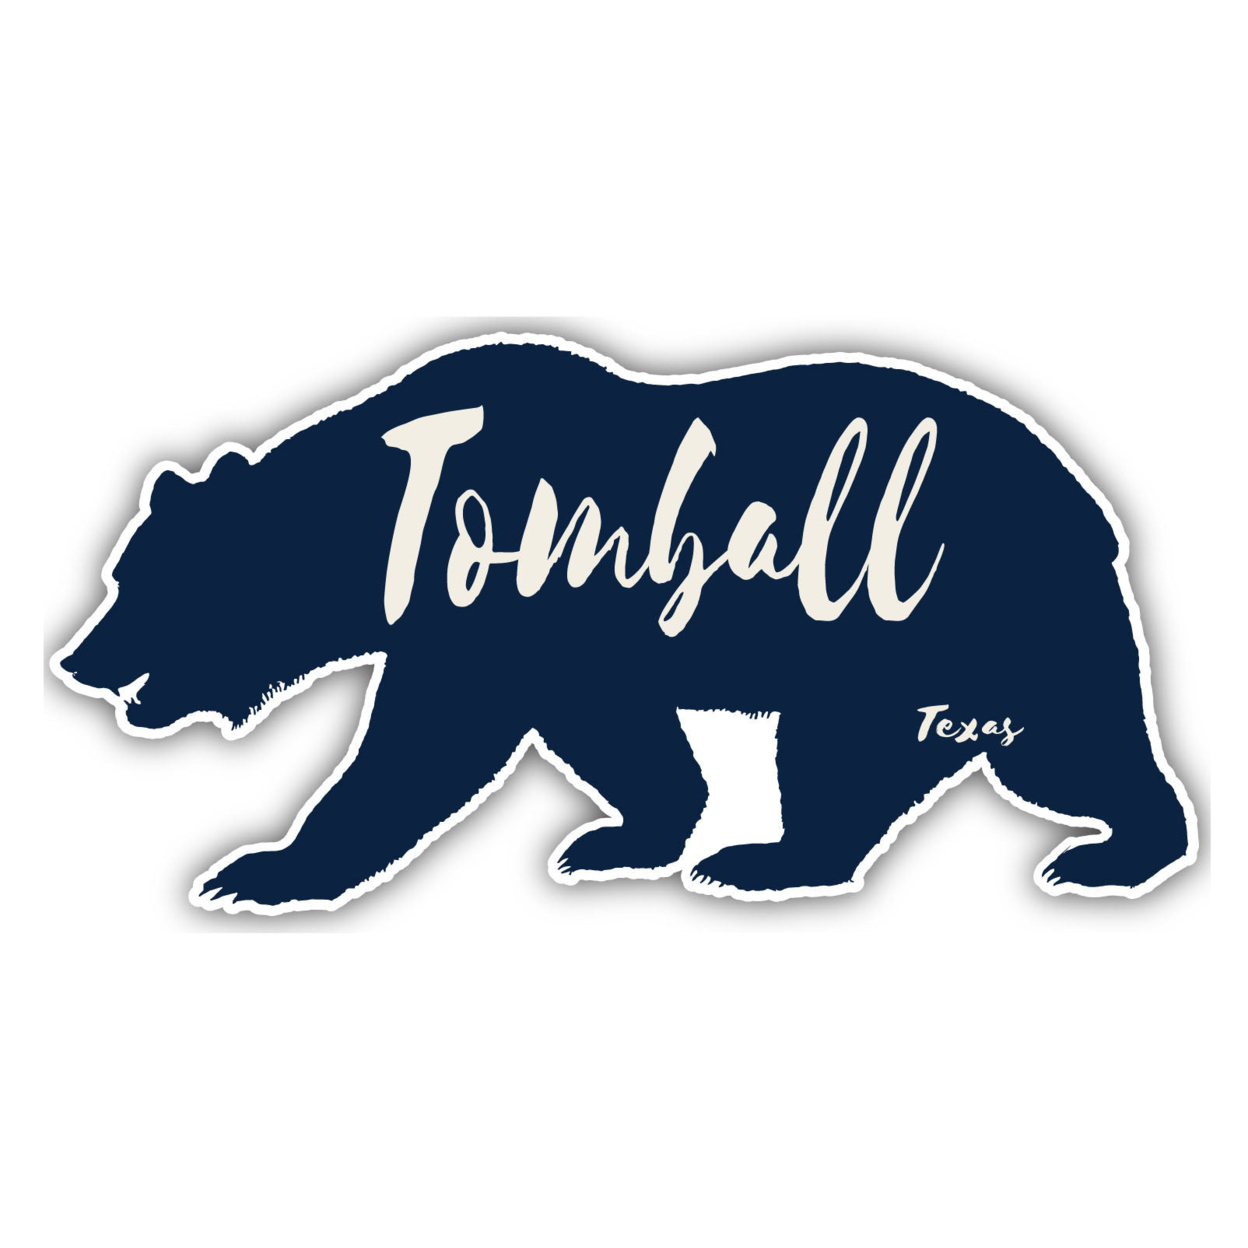 Tomball Texas Souvenir Decorative Stickers (Choose Theme And Size) - Single Unit, 2-Inch, Great Outdoors